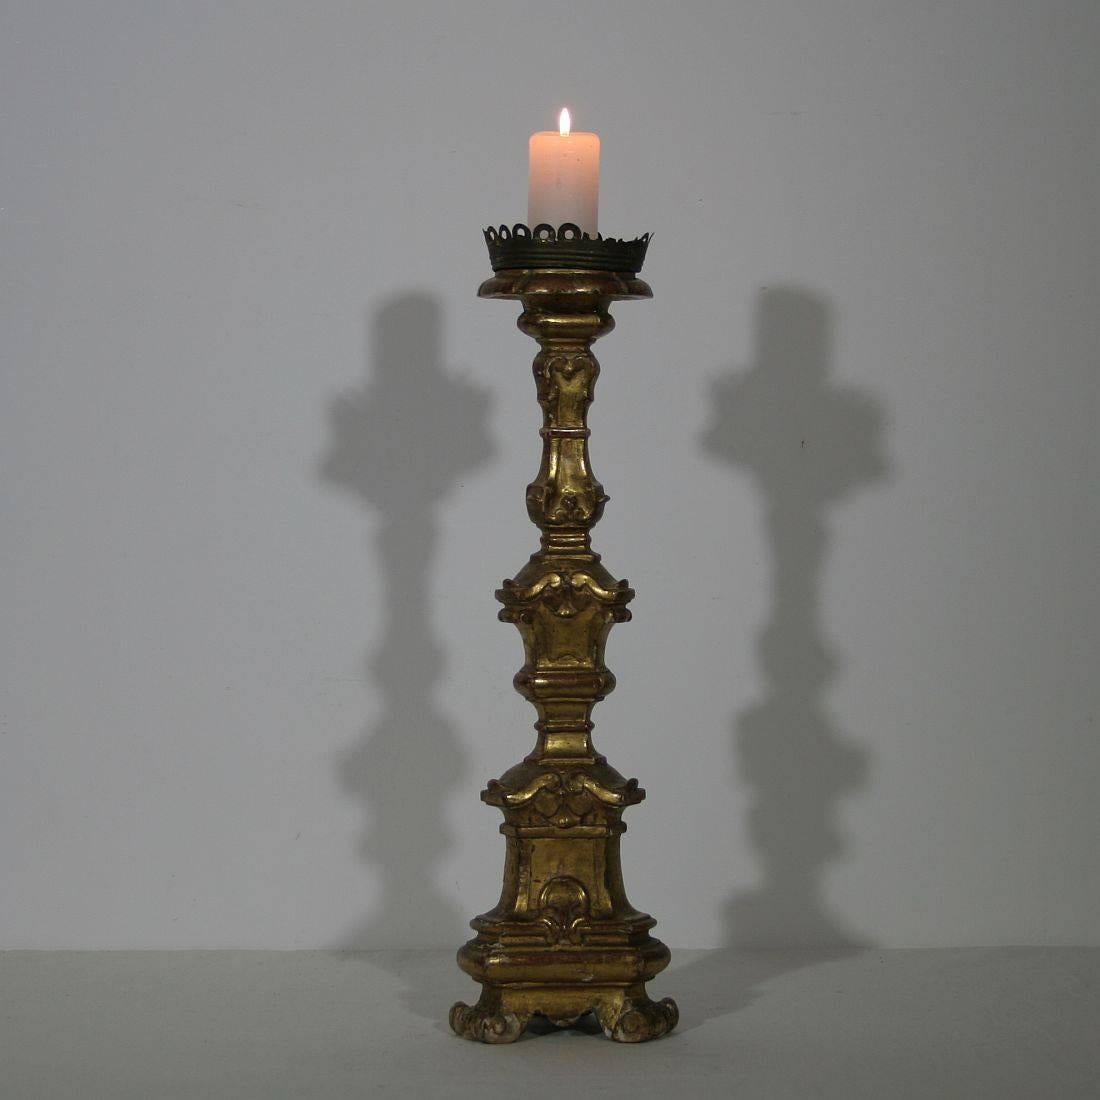 Beautiful carved and gilded wooden candlestick
Italy, circa 1750
Weathered, small losses on the gilding.